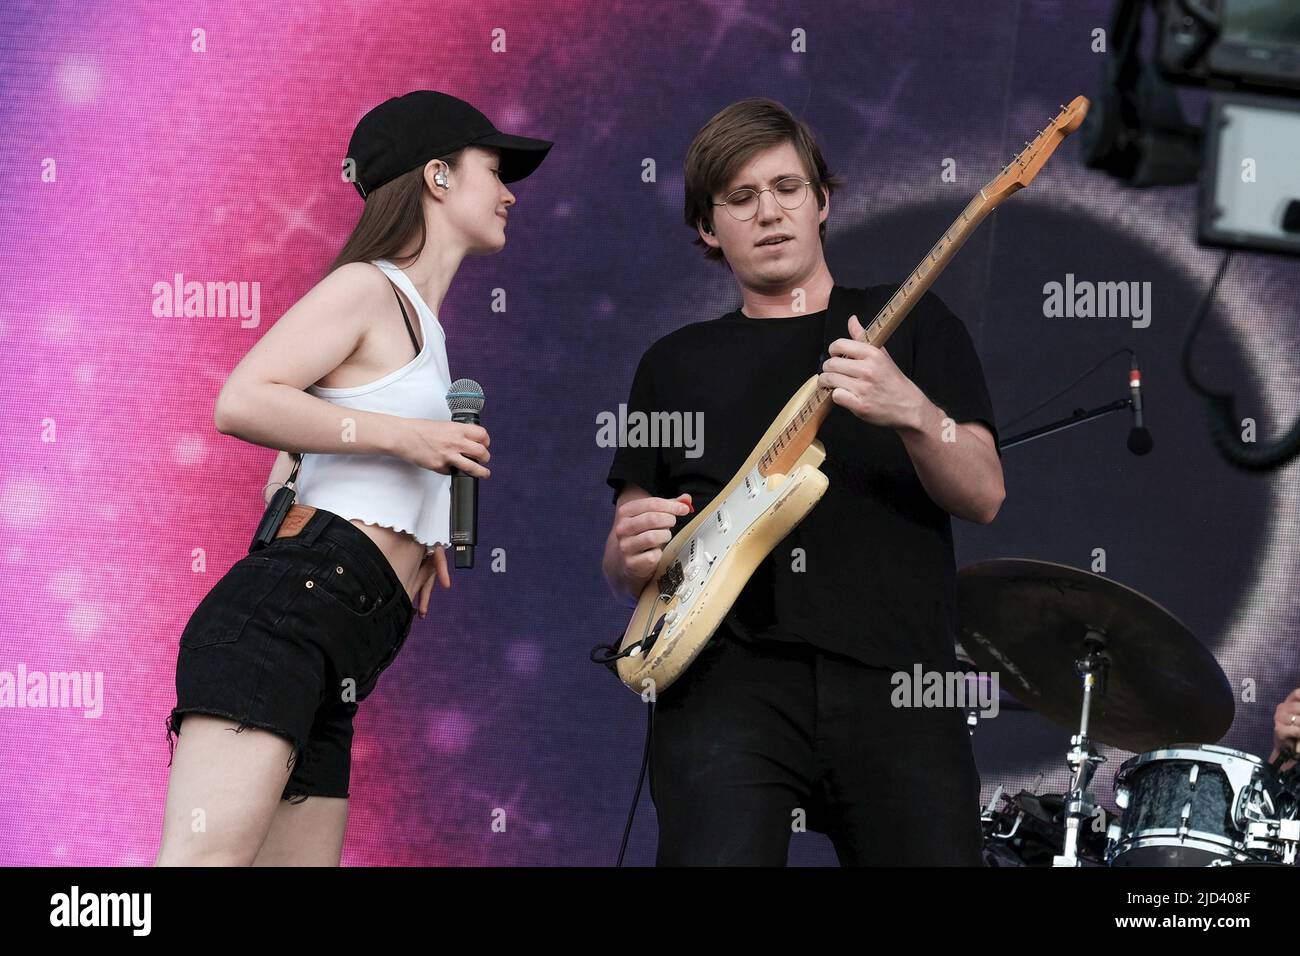 Newport, UK. 17th June, 2022. Norwegian singer songwriter and Scandipop artist Sigrid Solbakk Raabe and guitarist Sondre Berg Abrahamsen perform live on stage at the Isle of Wight Festival Credit: SOPA Images Limited/Alamy Live News Stock Photo